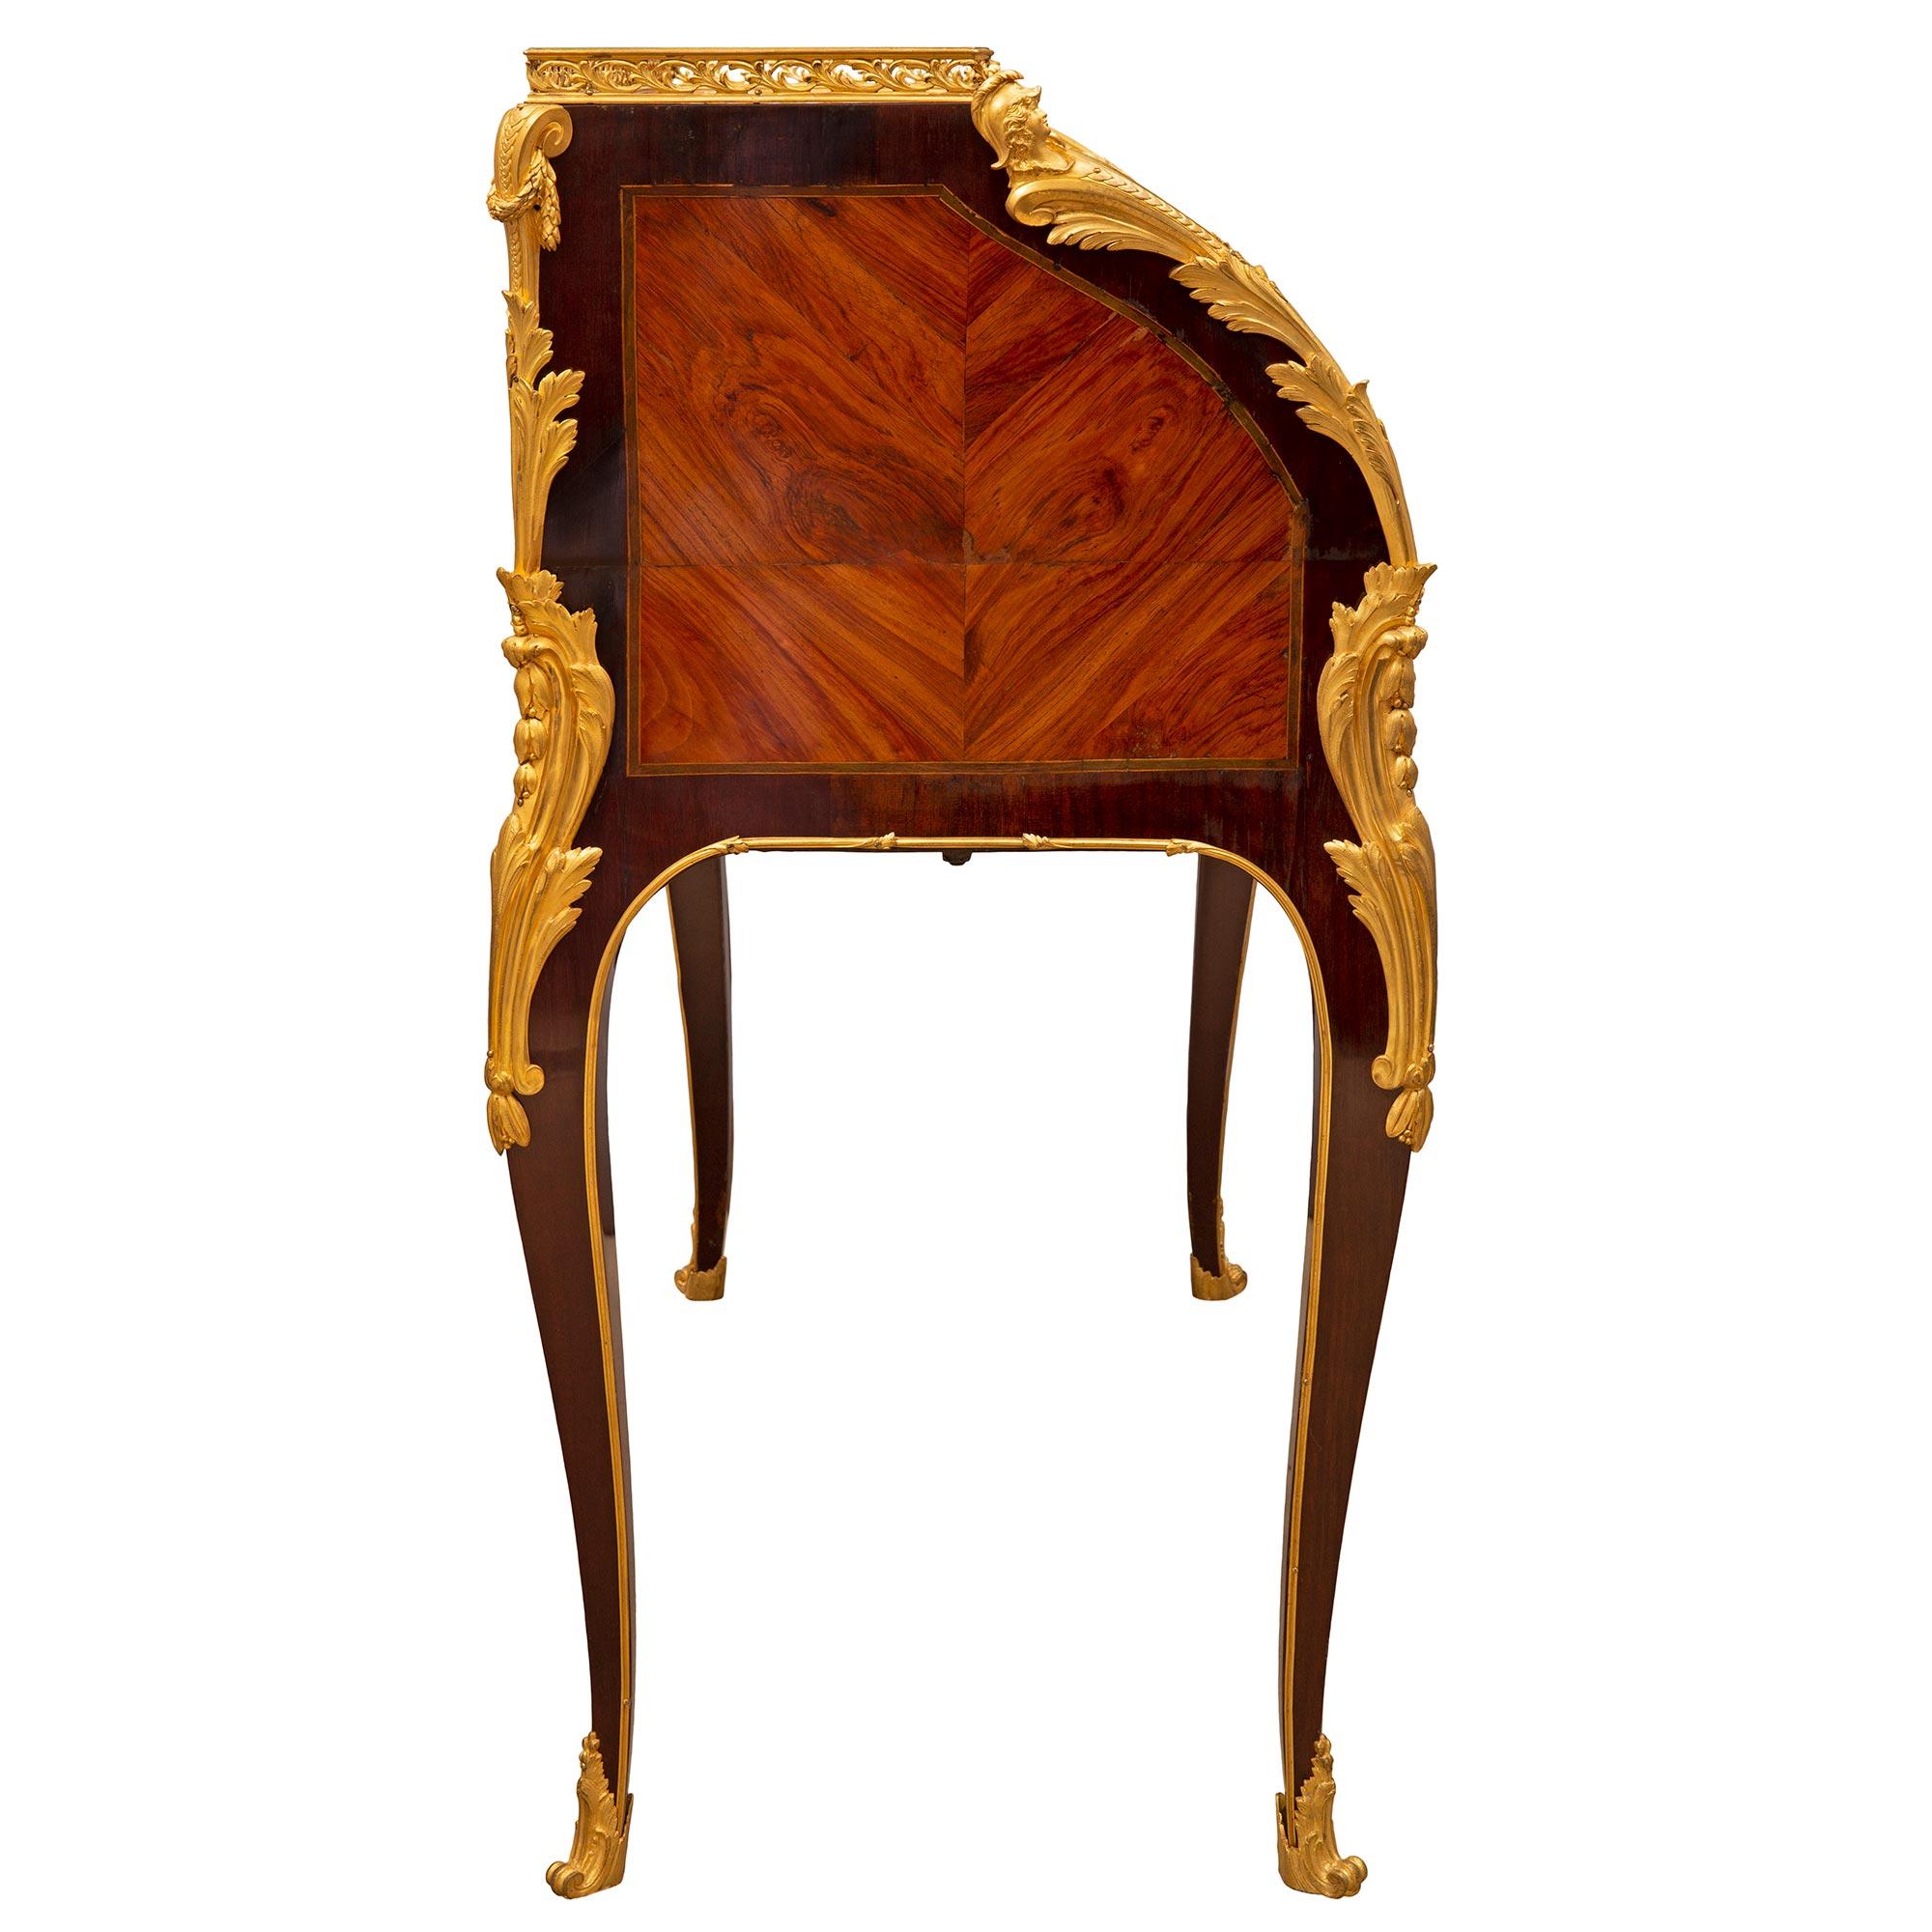 18th Century and Earlier French 18th Century Louis XV Period Kingwood, Tulipwood and Ormolu Desk For Sale